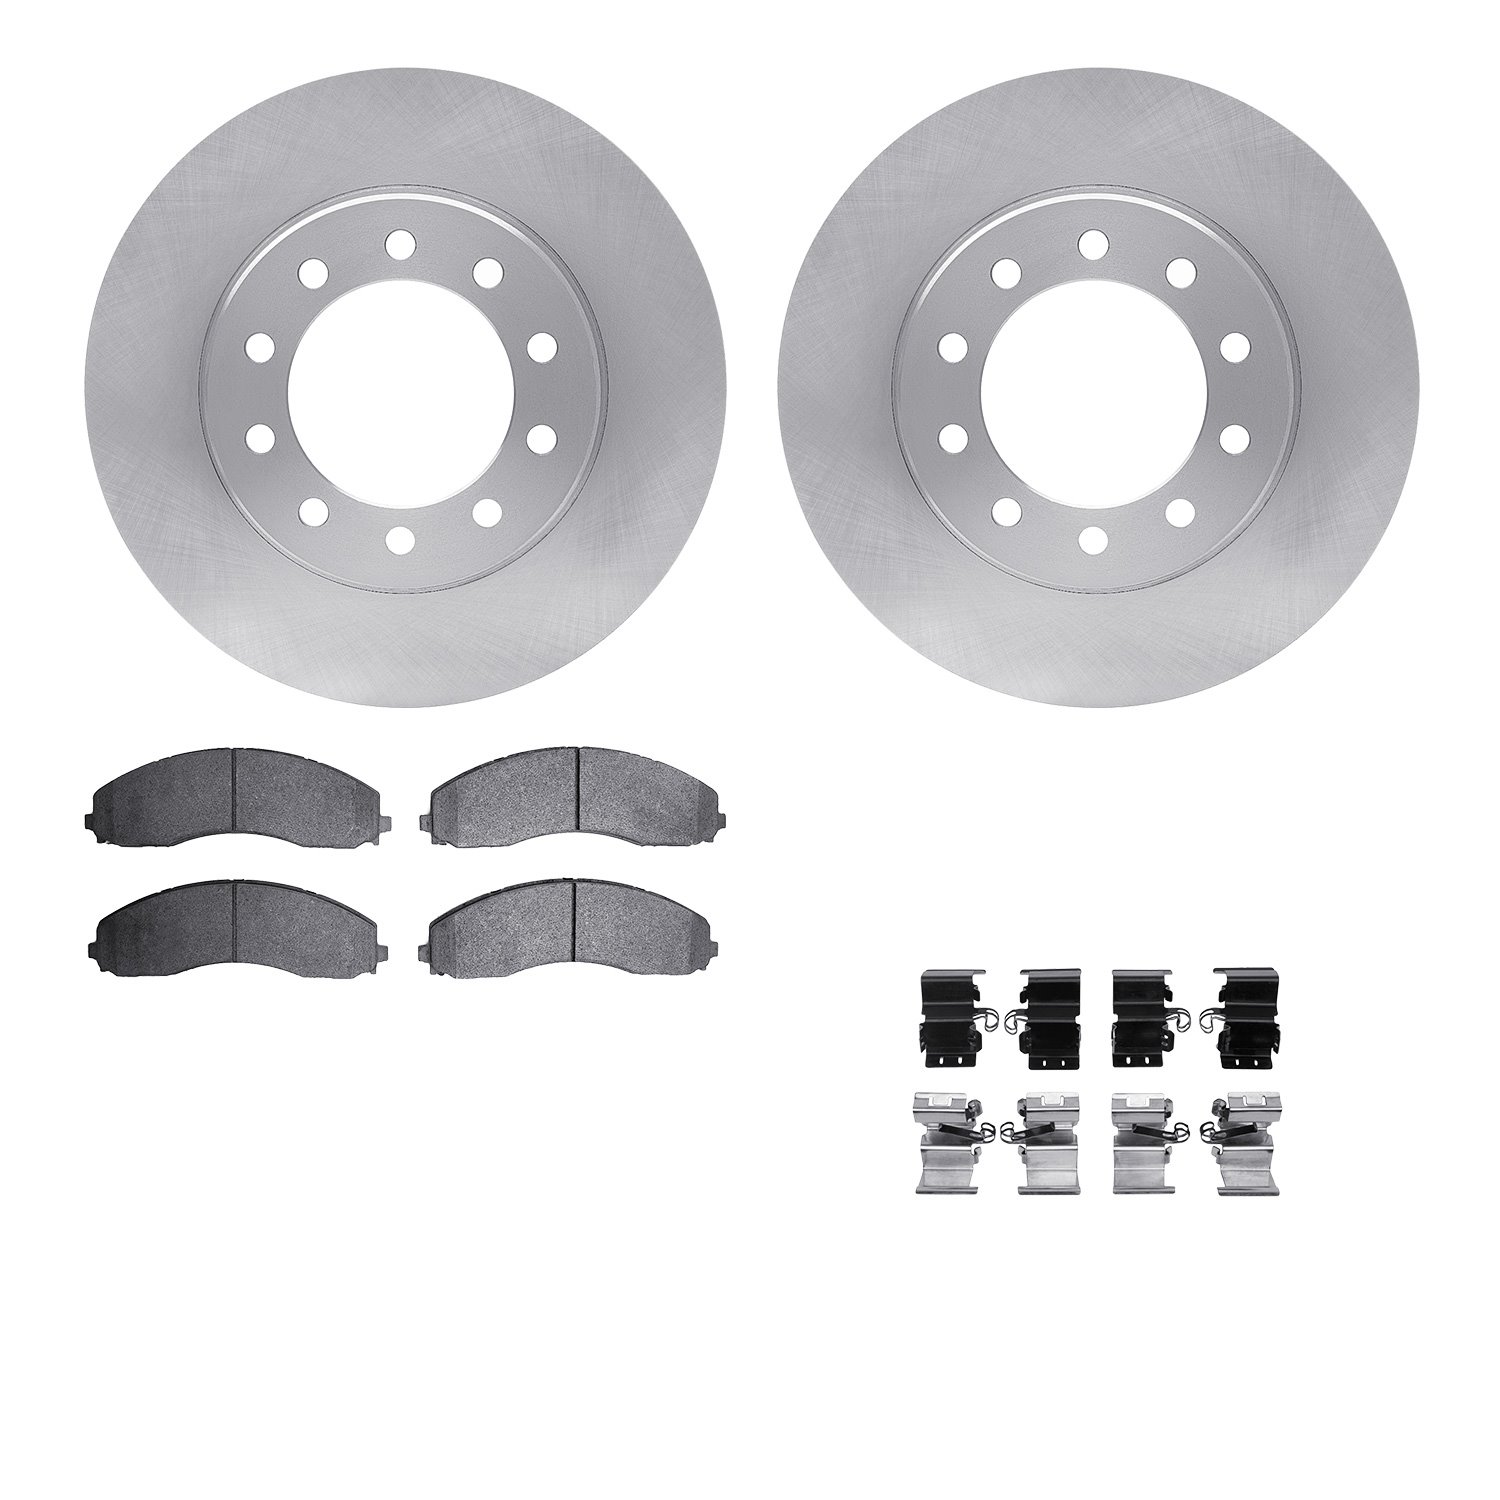 6212-99789 Brake Rotors w/Heavy-Duty Brake Pads Kit & Hardware, Fits Select Ford/Lincoln/Mercury/Mazda, Position: Front